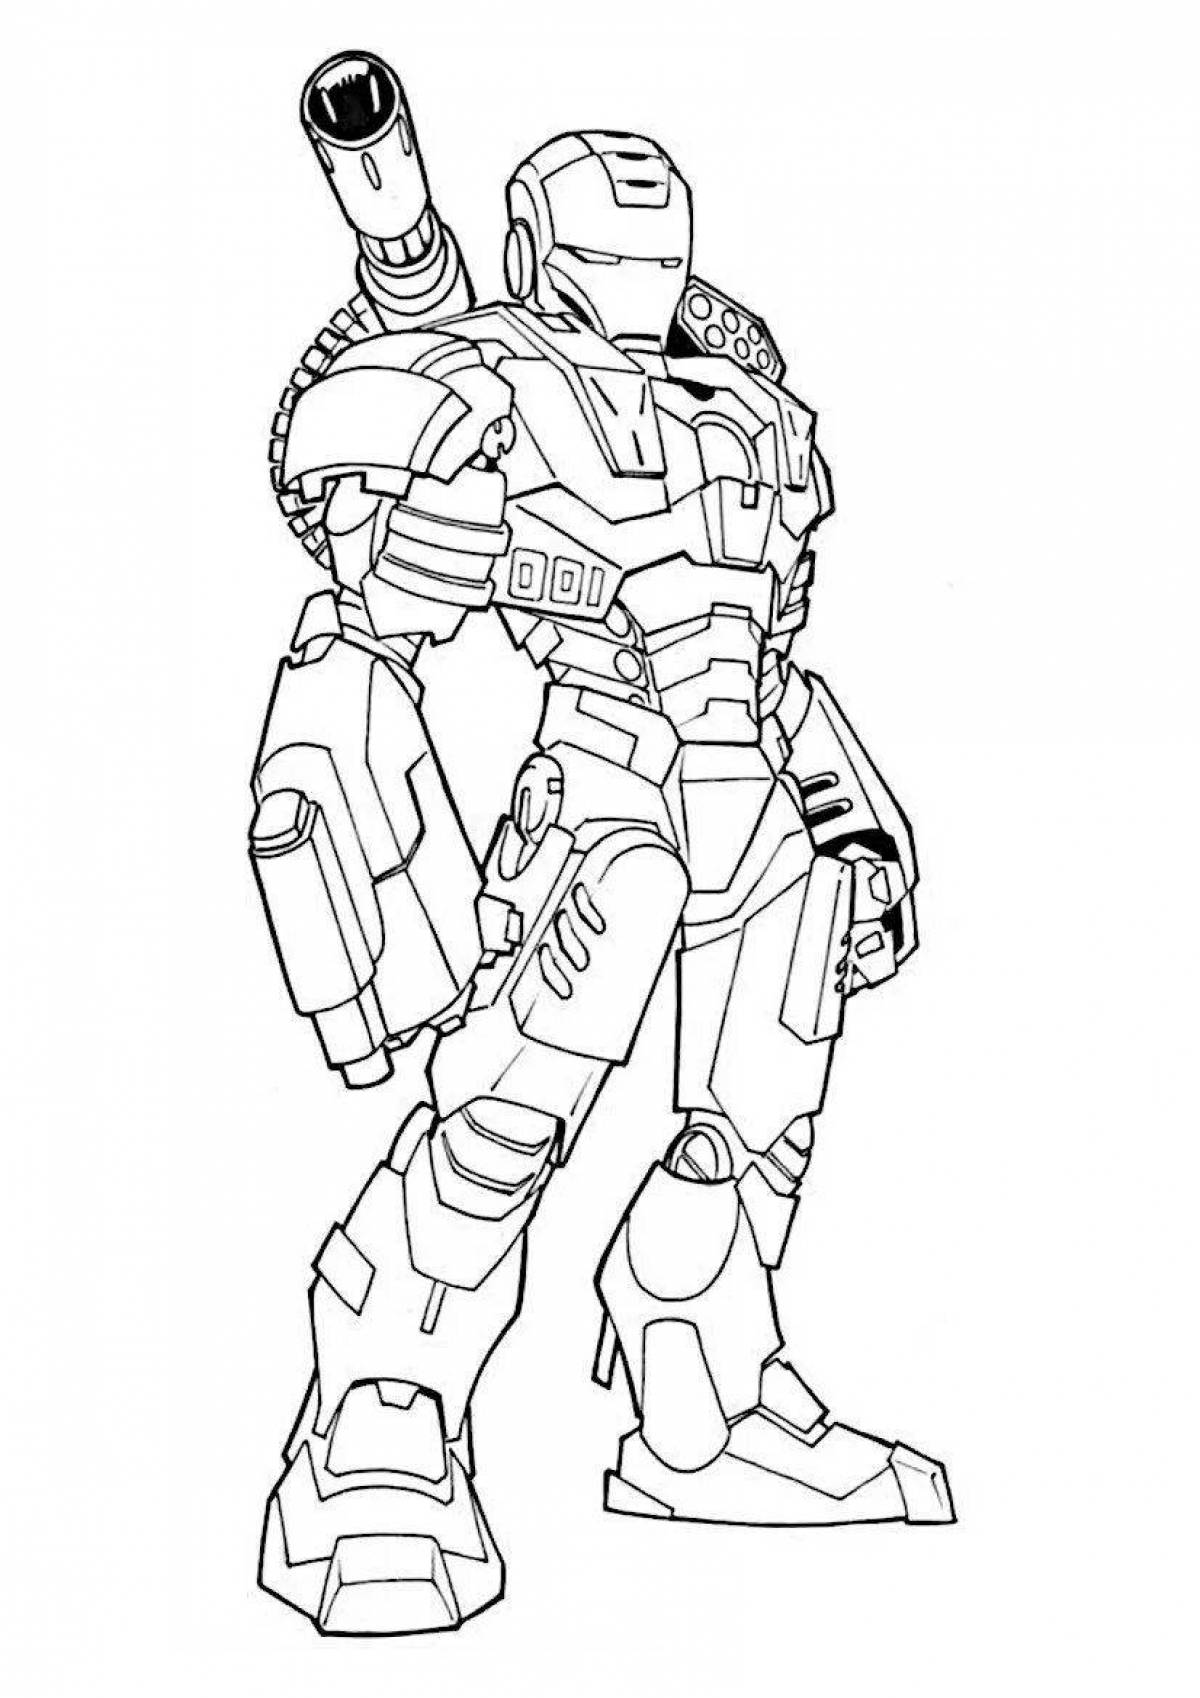 Glorious marvel iron man coloring page